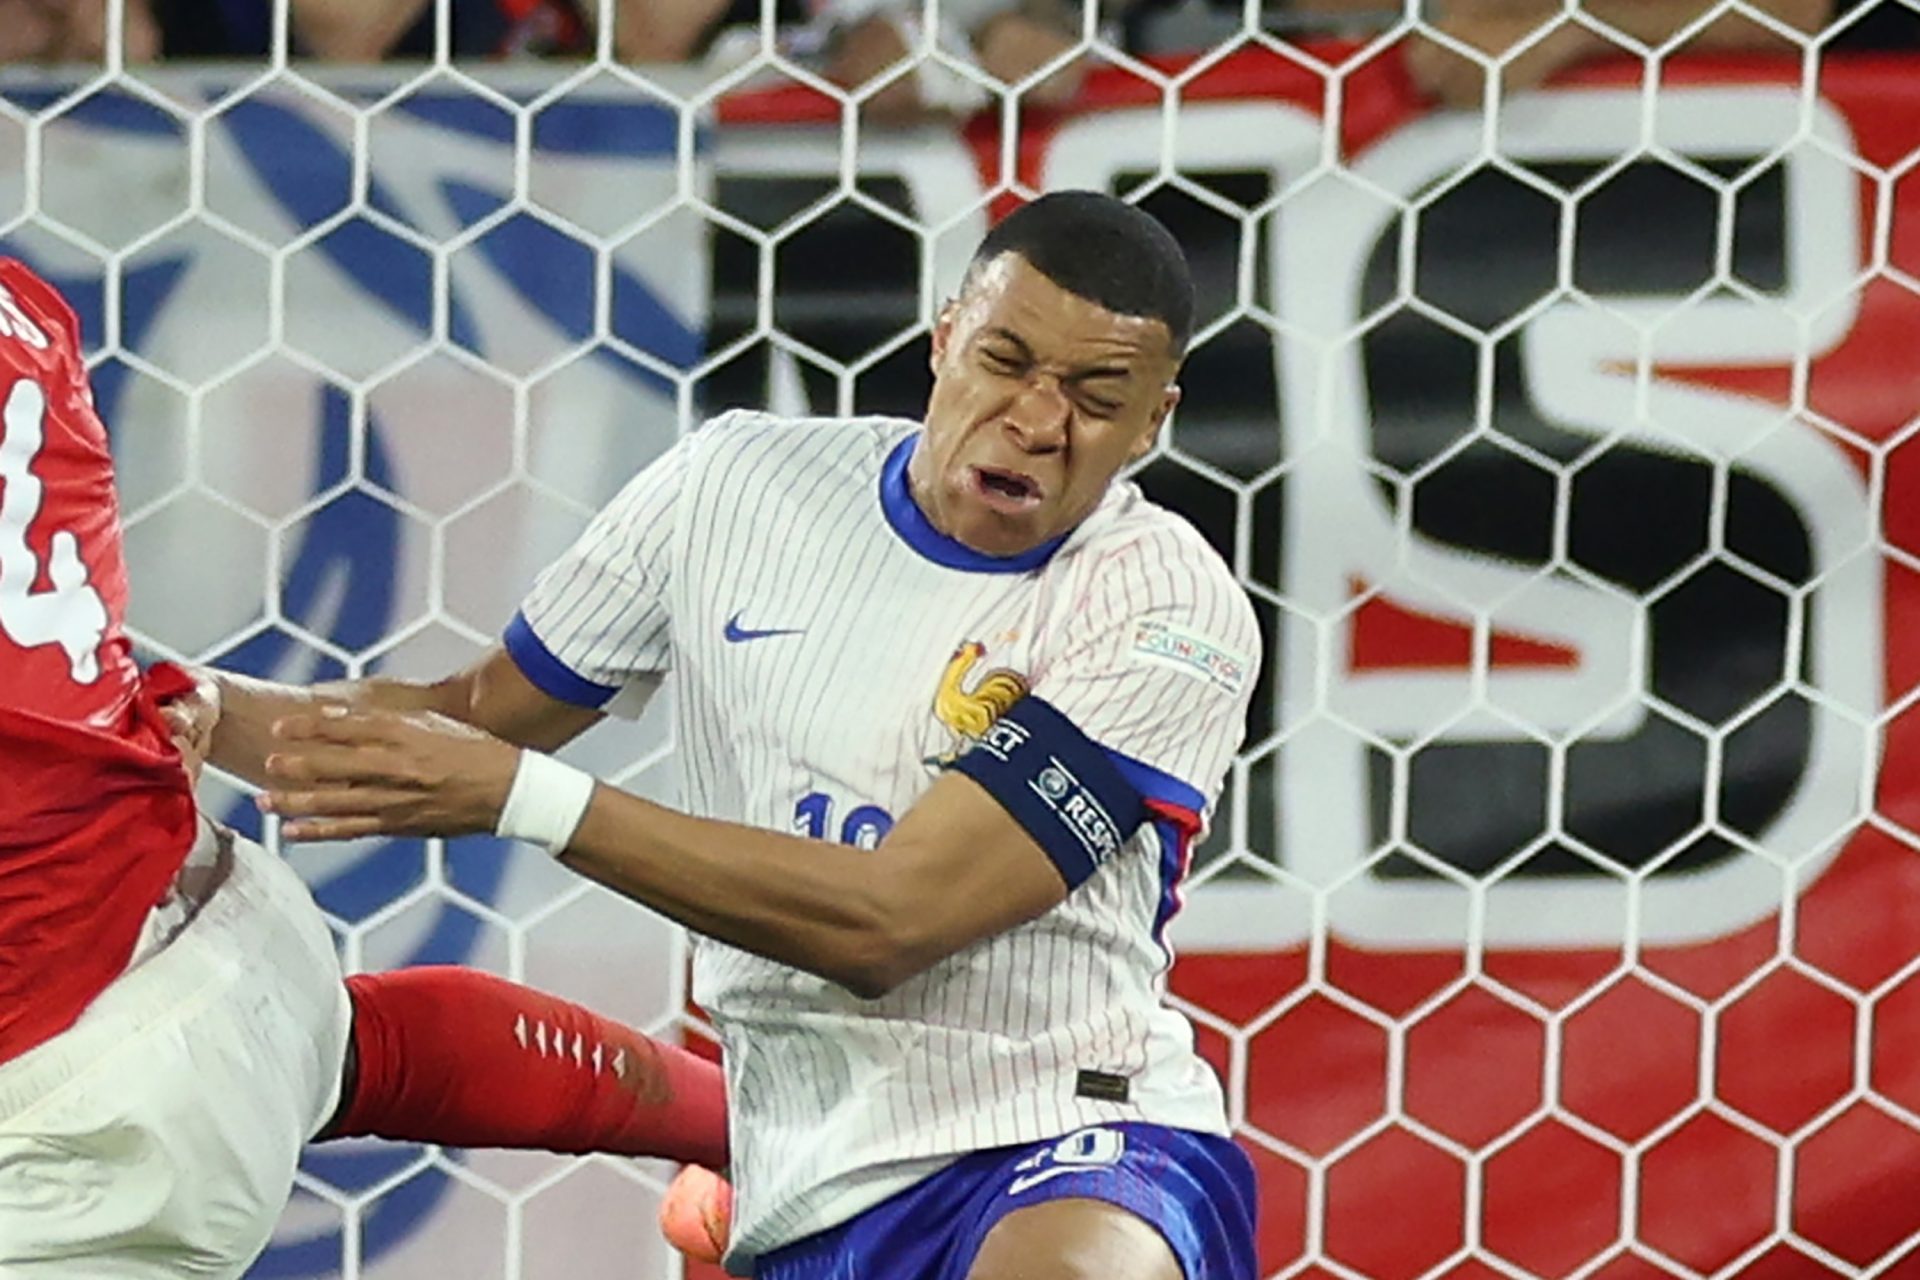 Will Kylian Mbappe play against the Netherlands? This is what Didier Deschamps says